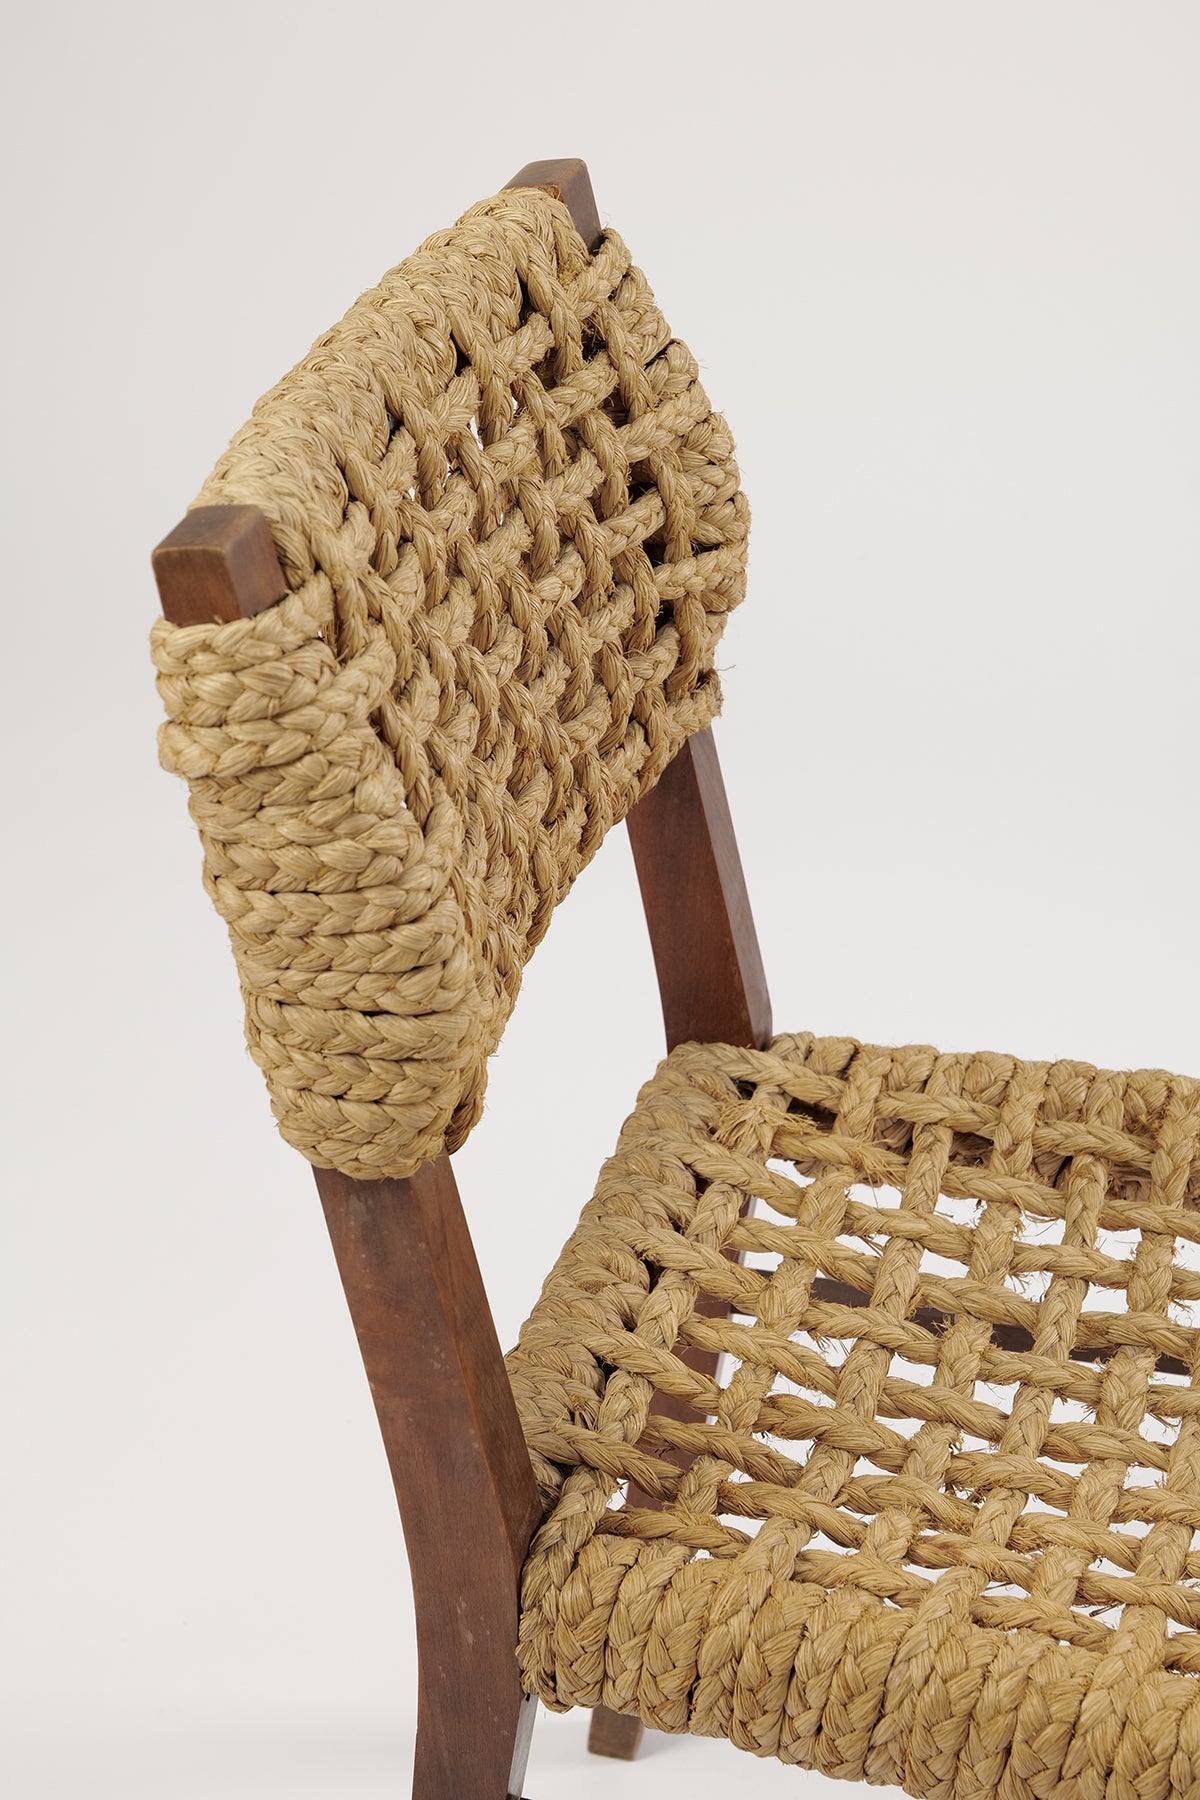 Audoux Minet Rope Chair (2 Available)